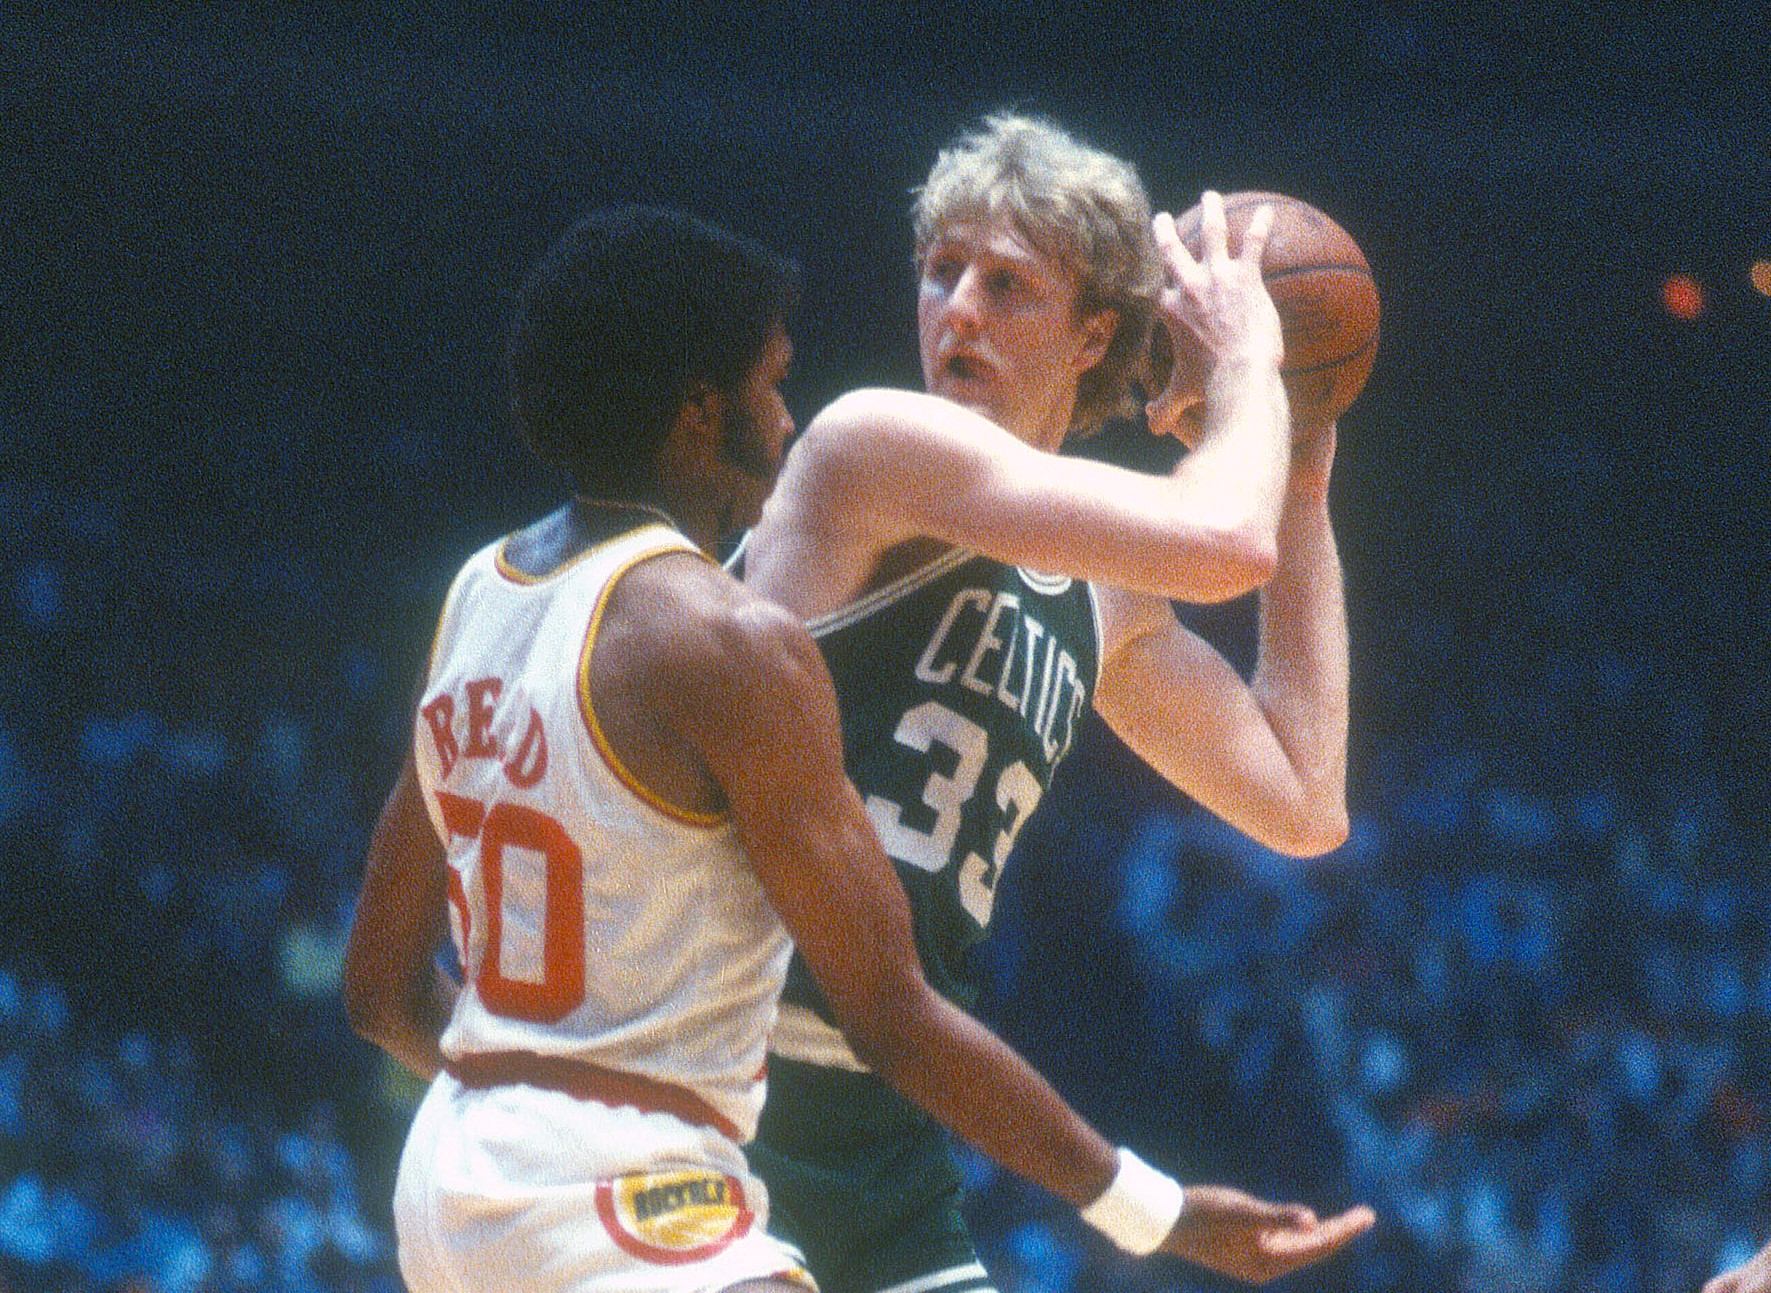 Larry Bird of the Boston Celtics looking to pass while being defended by Robert Reid of the Houston Rockets.